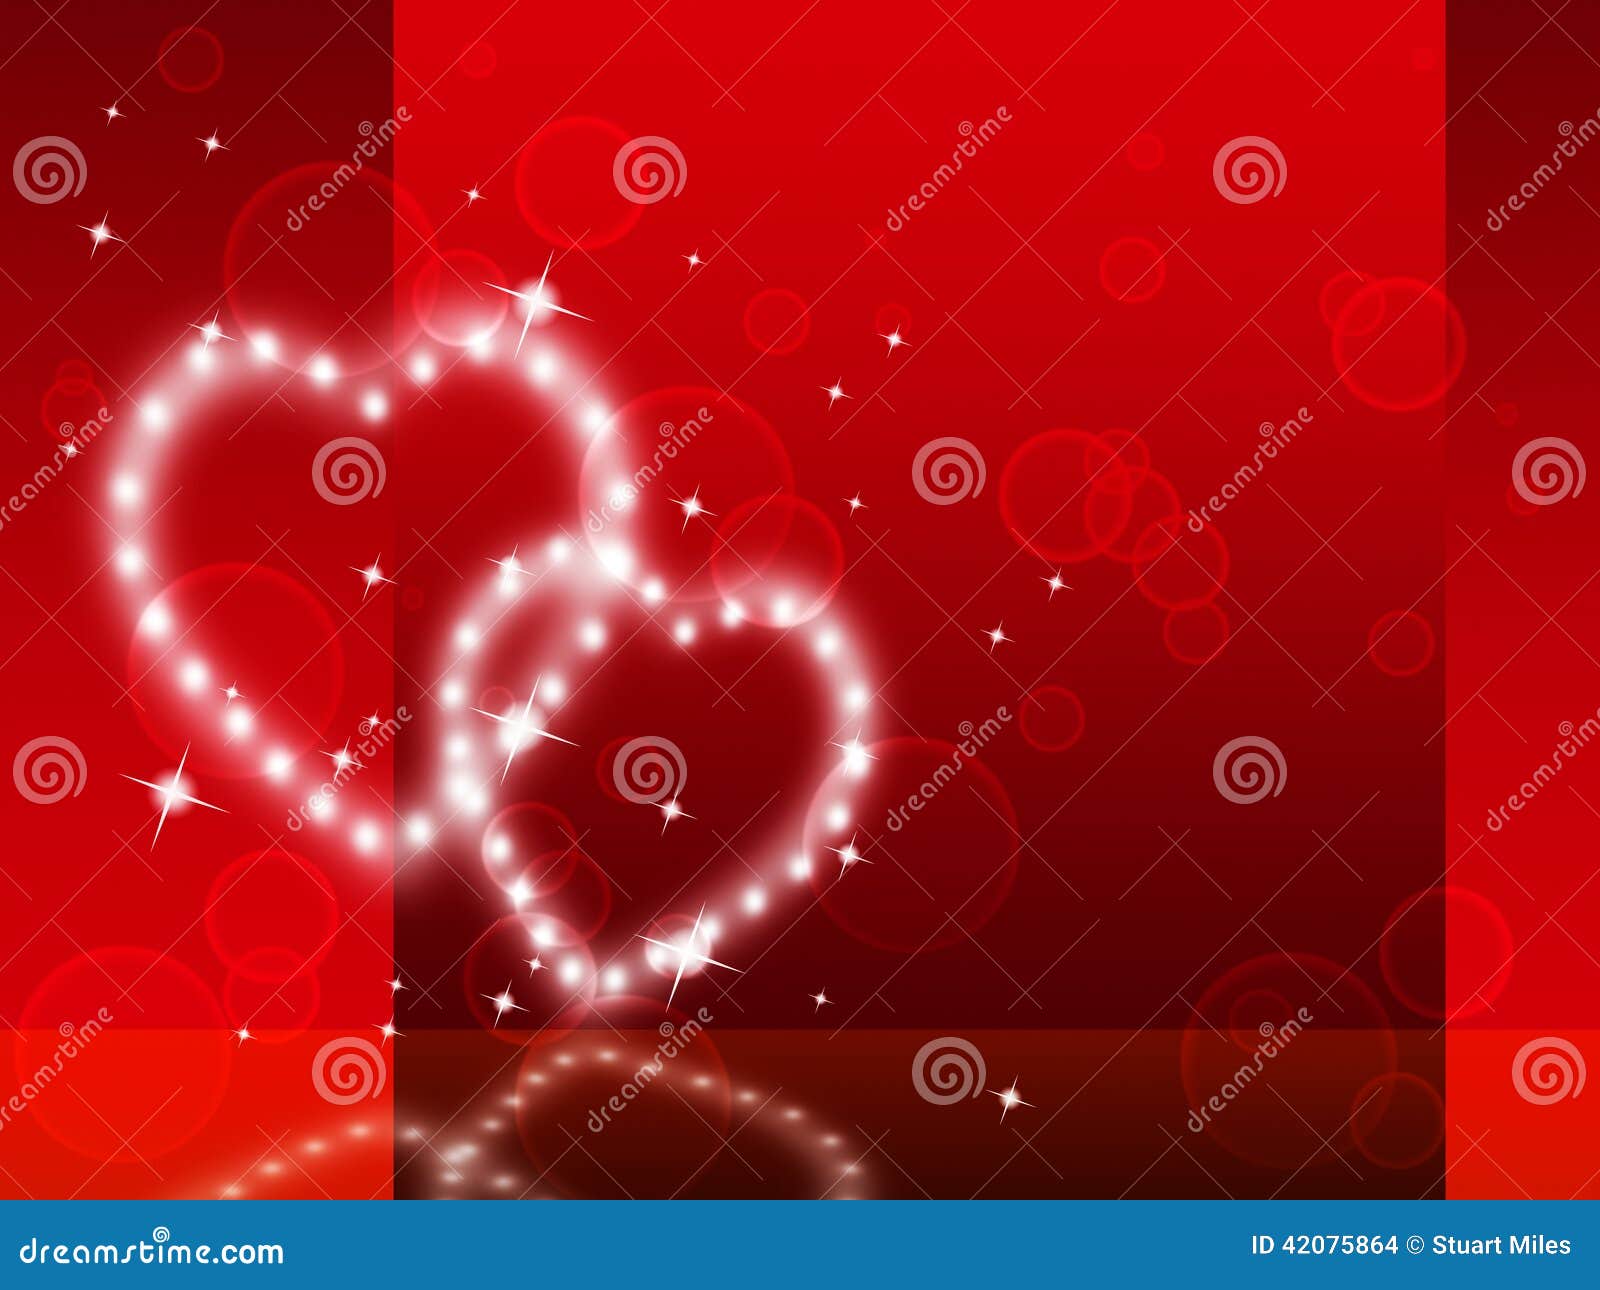 red hearts background shows fondness special and sparkling